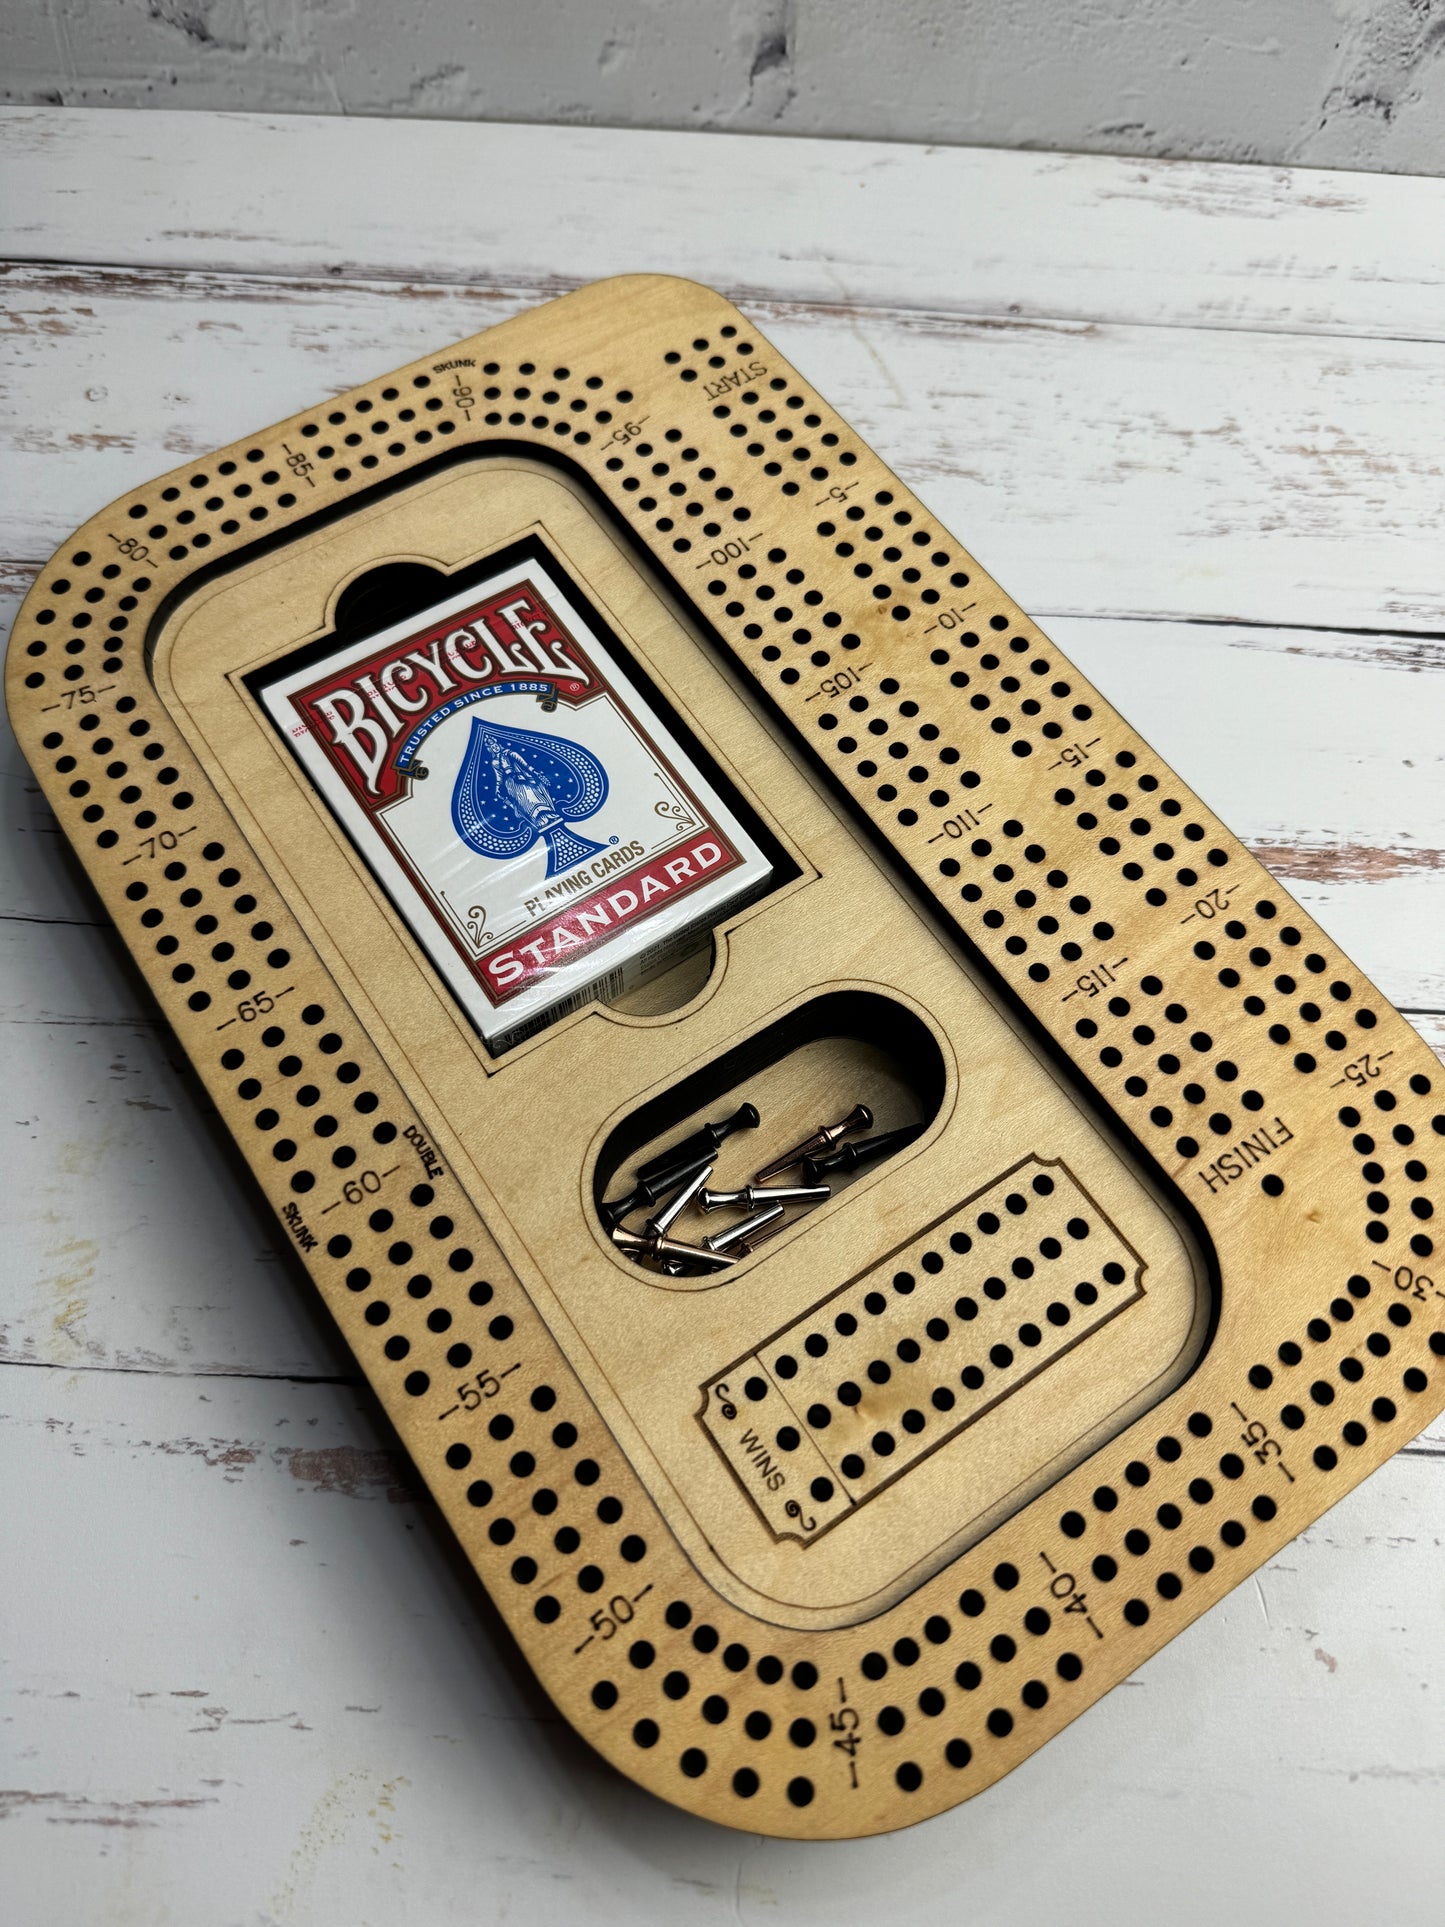 There's always time for cribbage